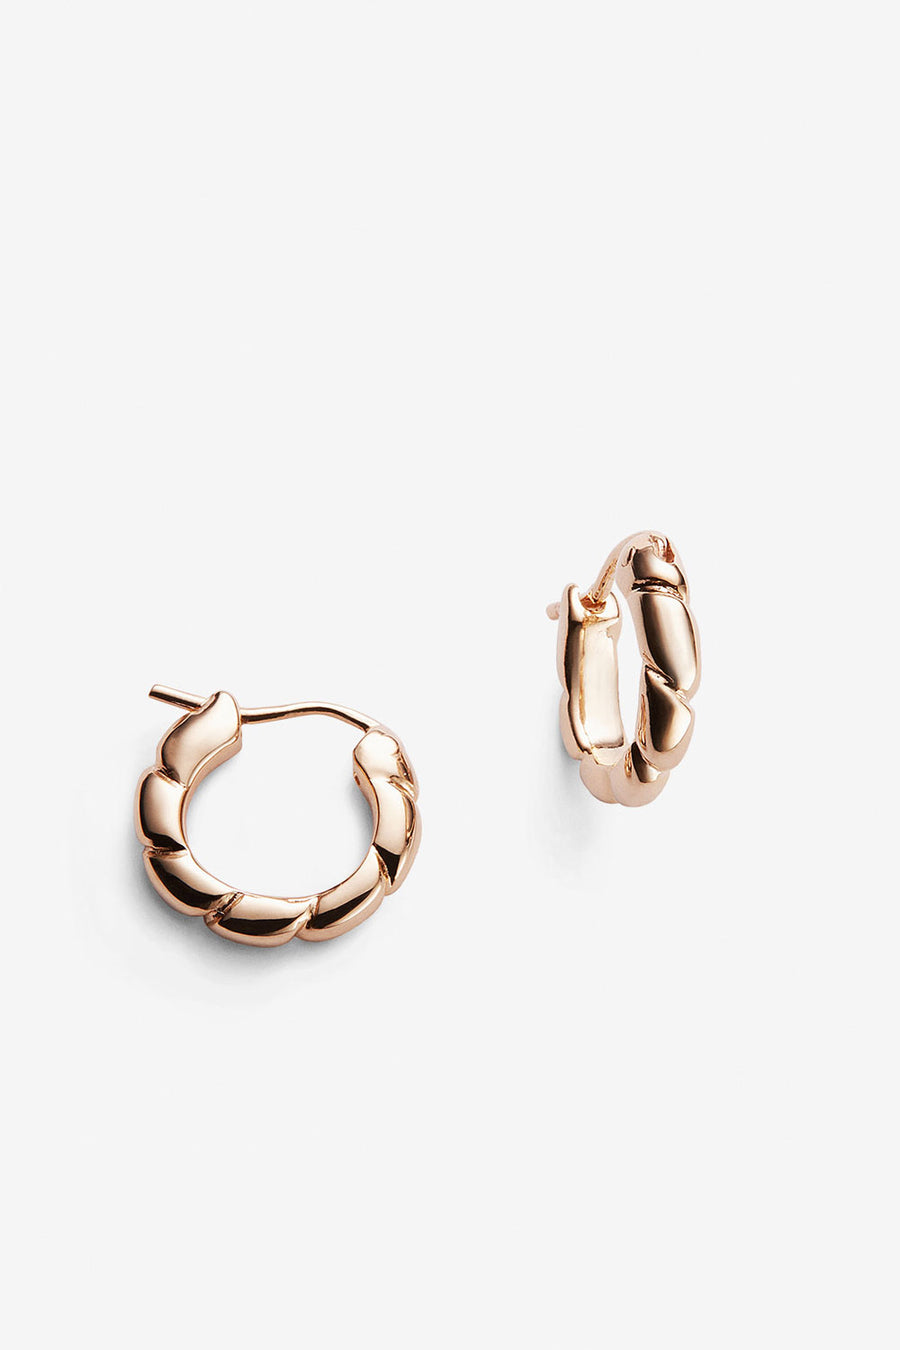 HELENA ROHNER - Small Curly Gold Plated Hoops